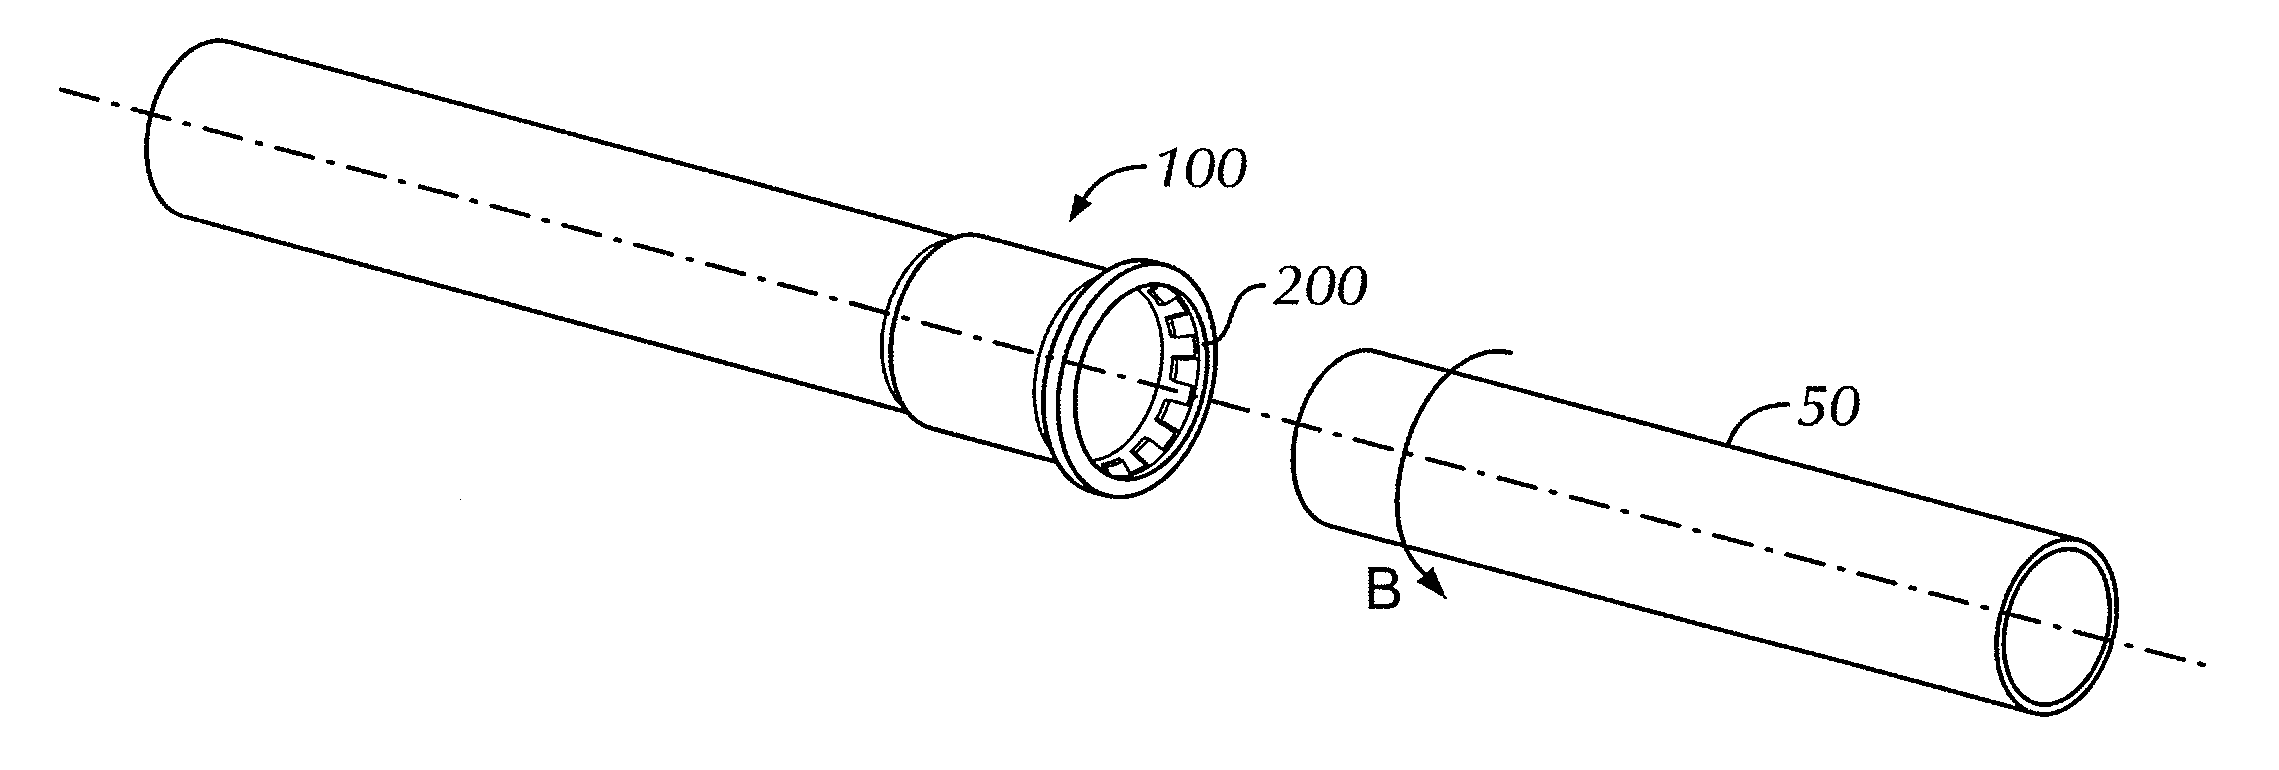 Tool-free metal conduit connector and related methods